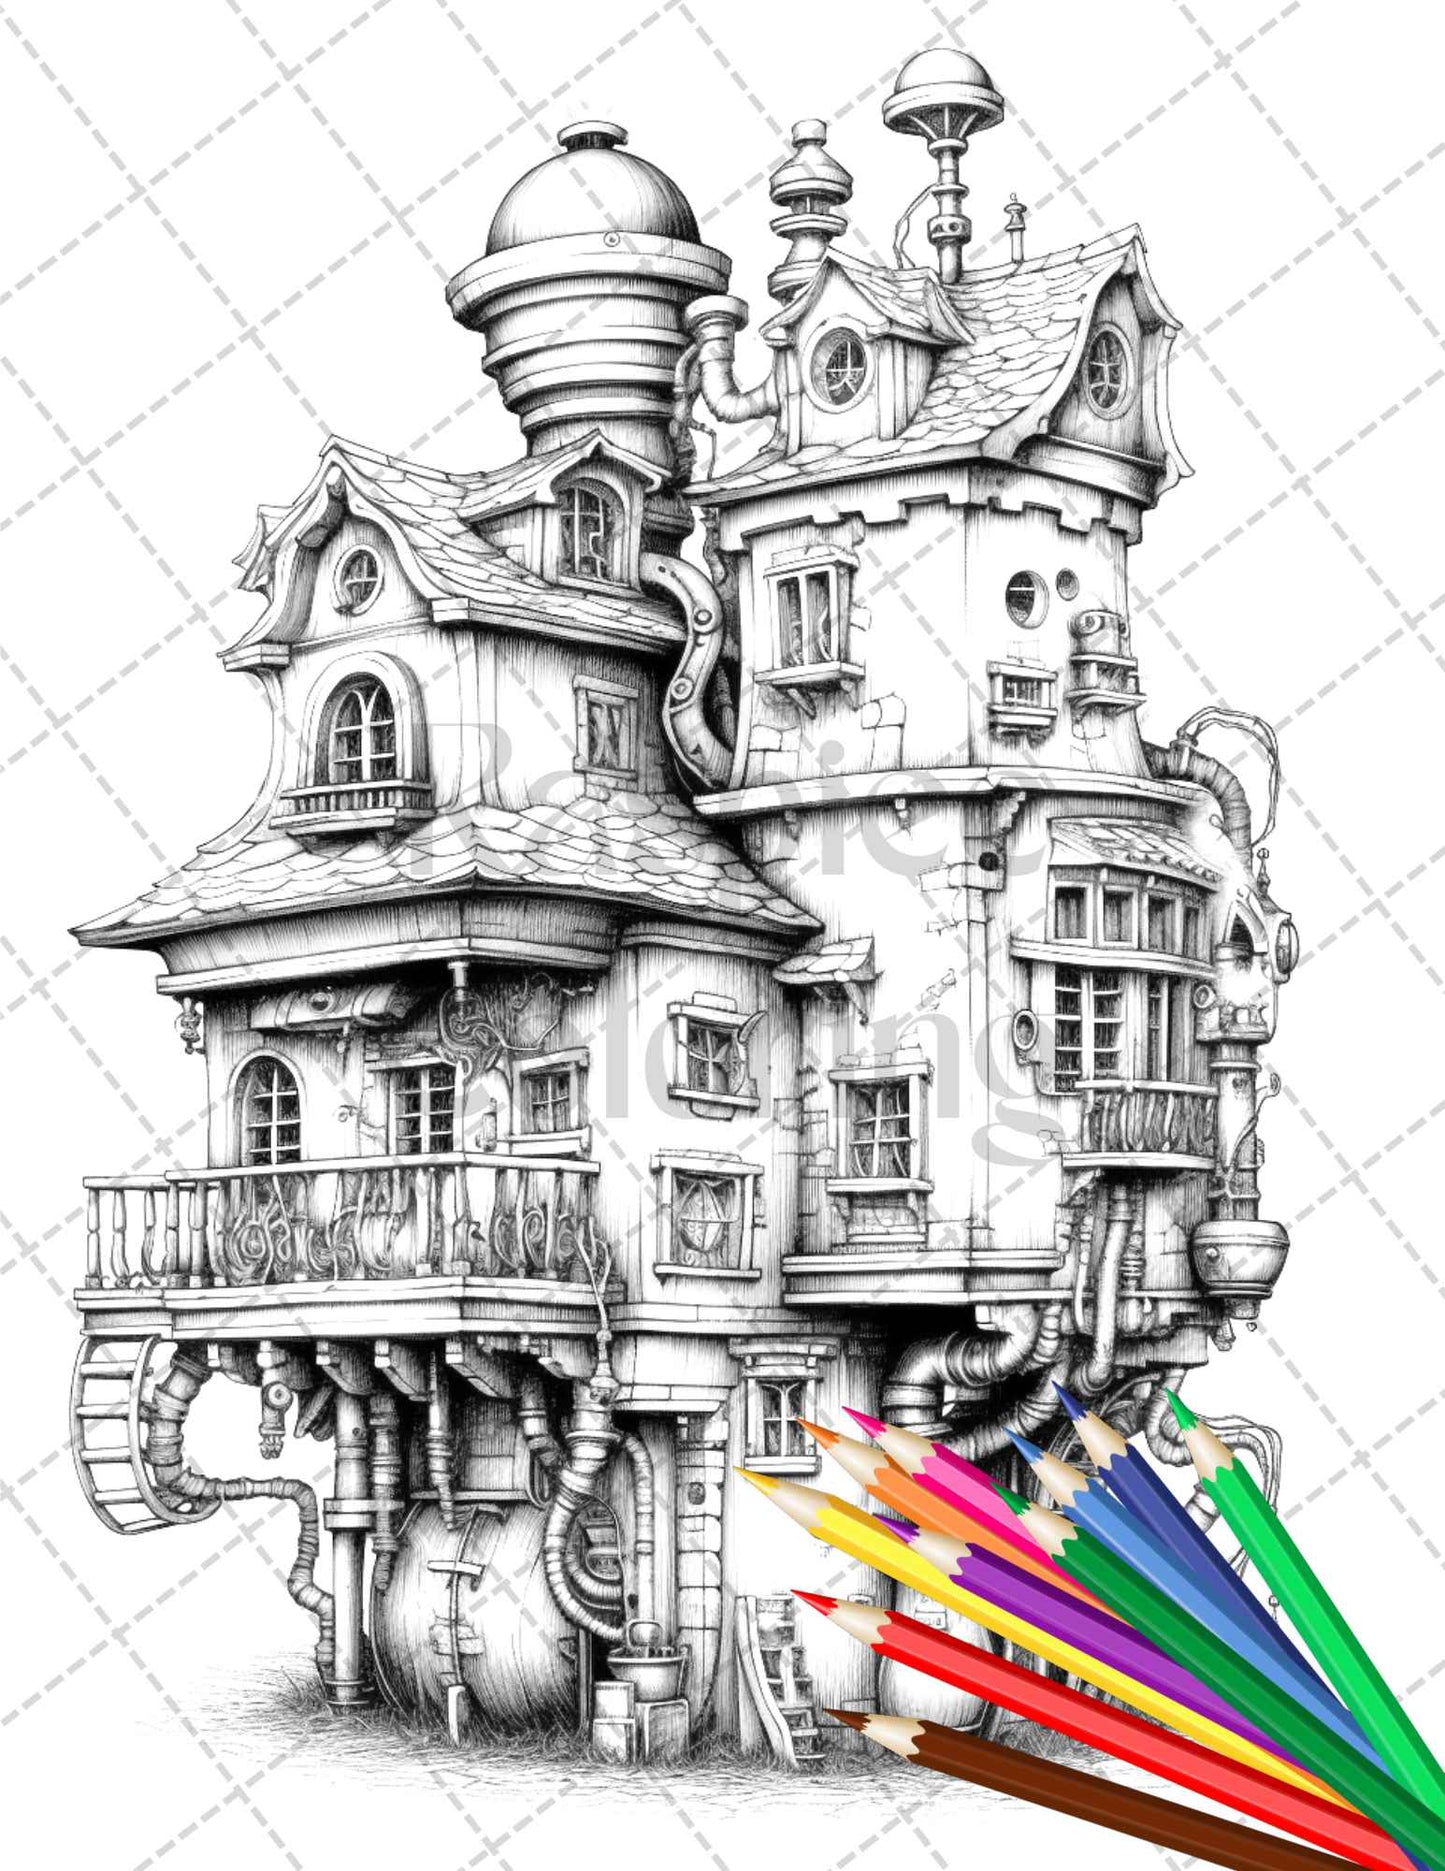 50 Steampunk Houses Grayscale Coloring Pages Printable for Adults, PDF File Instant Download - raspiee